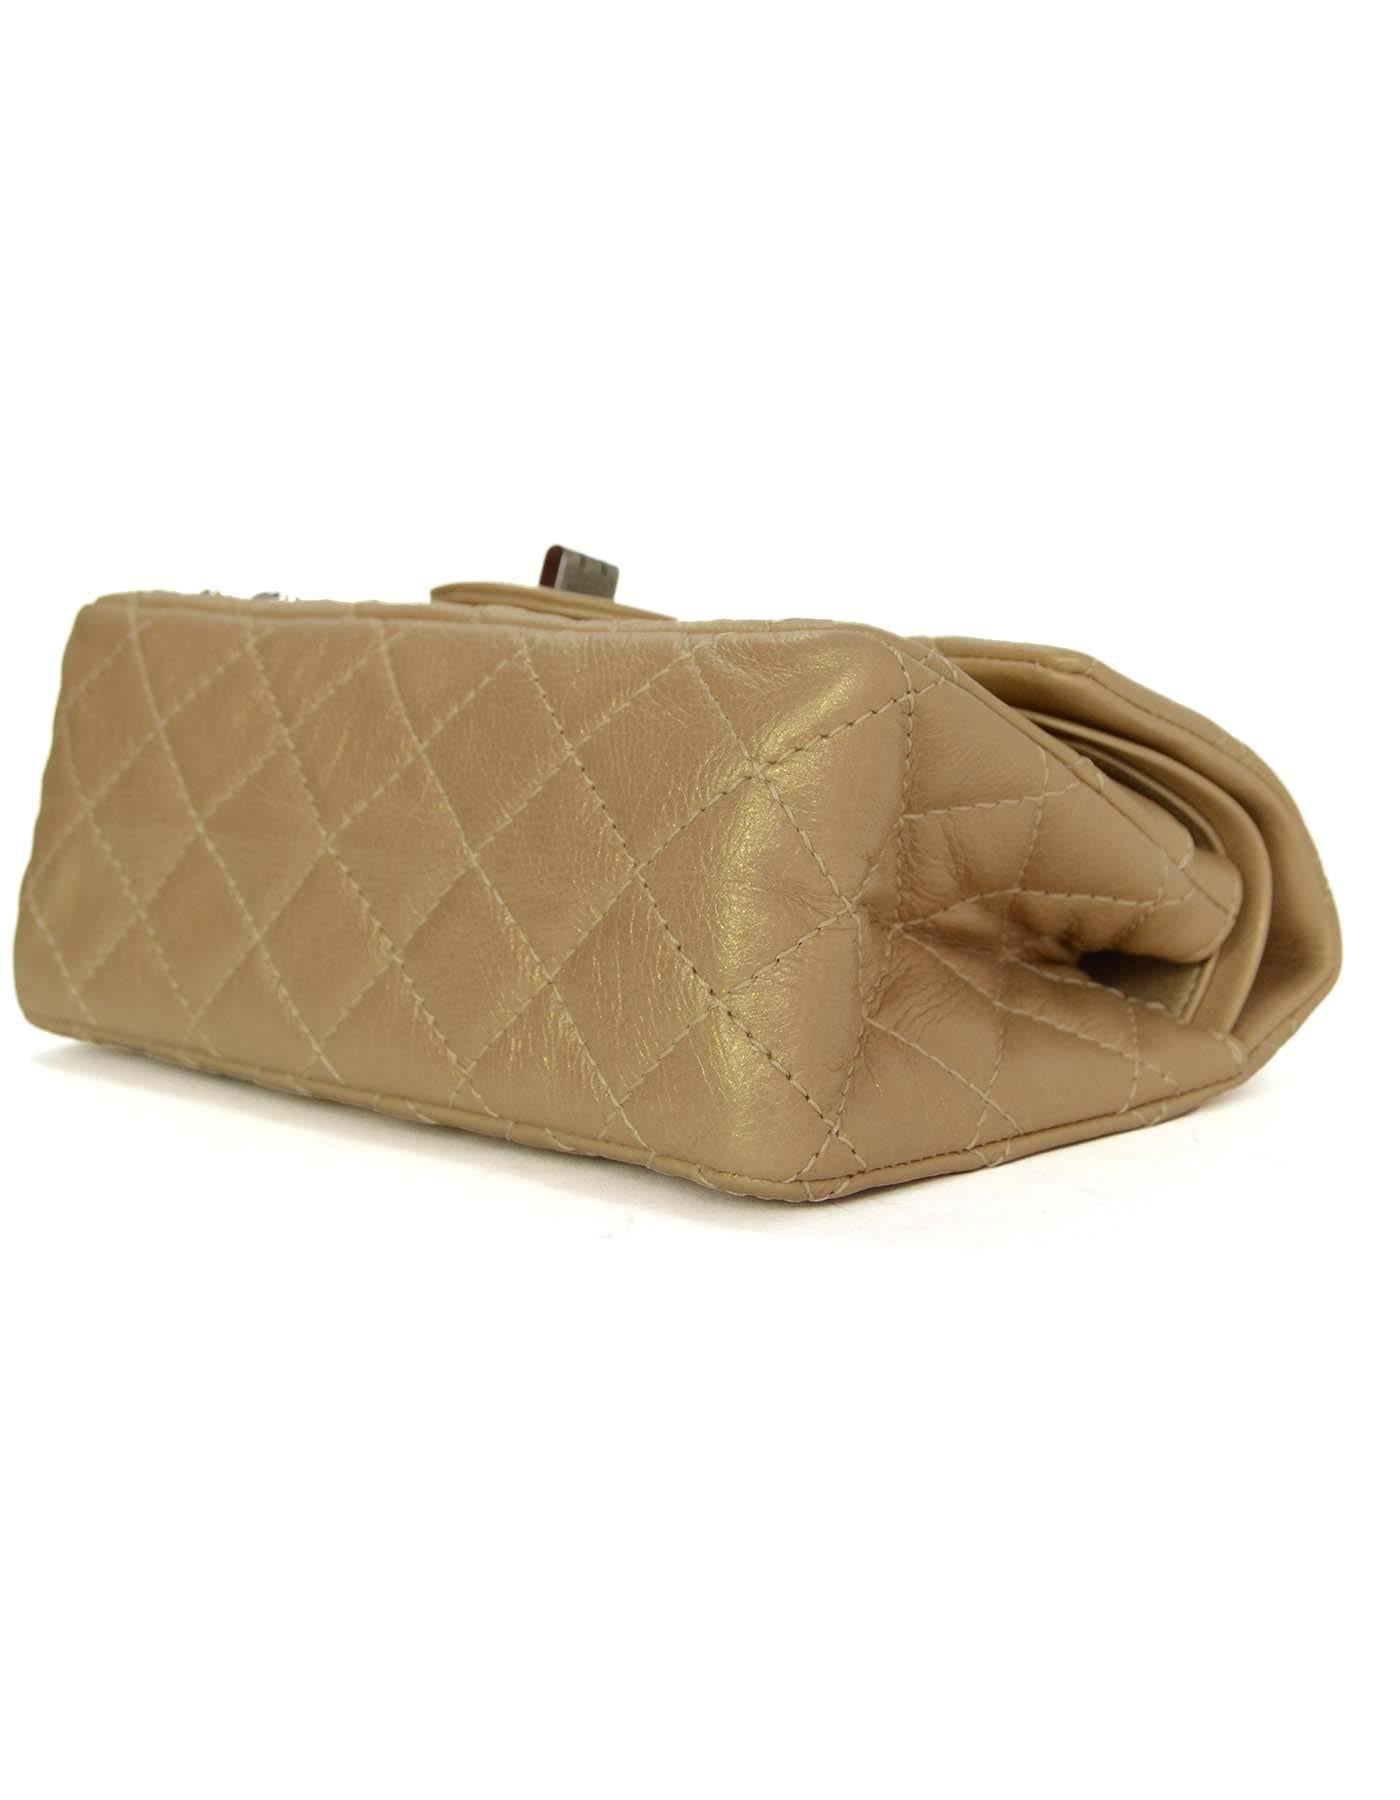 Women's Chanel Rare Collectors Gold Distressed Lucky Charms ReIssue Bag 2.55 rt. $8, 775